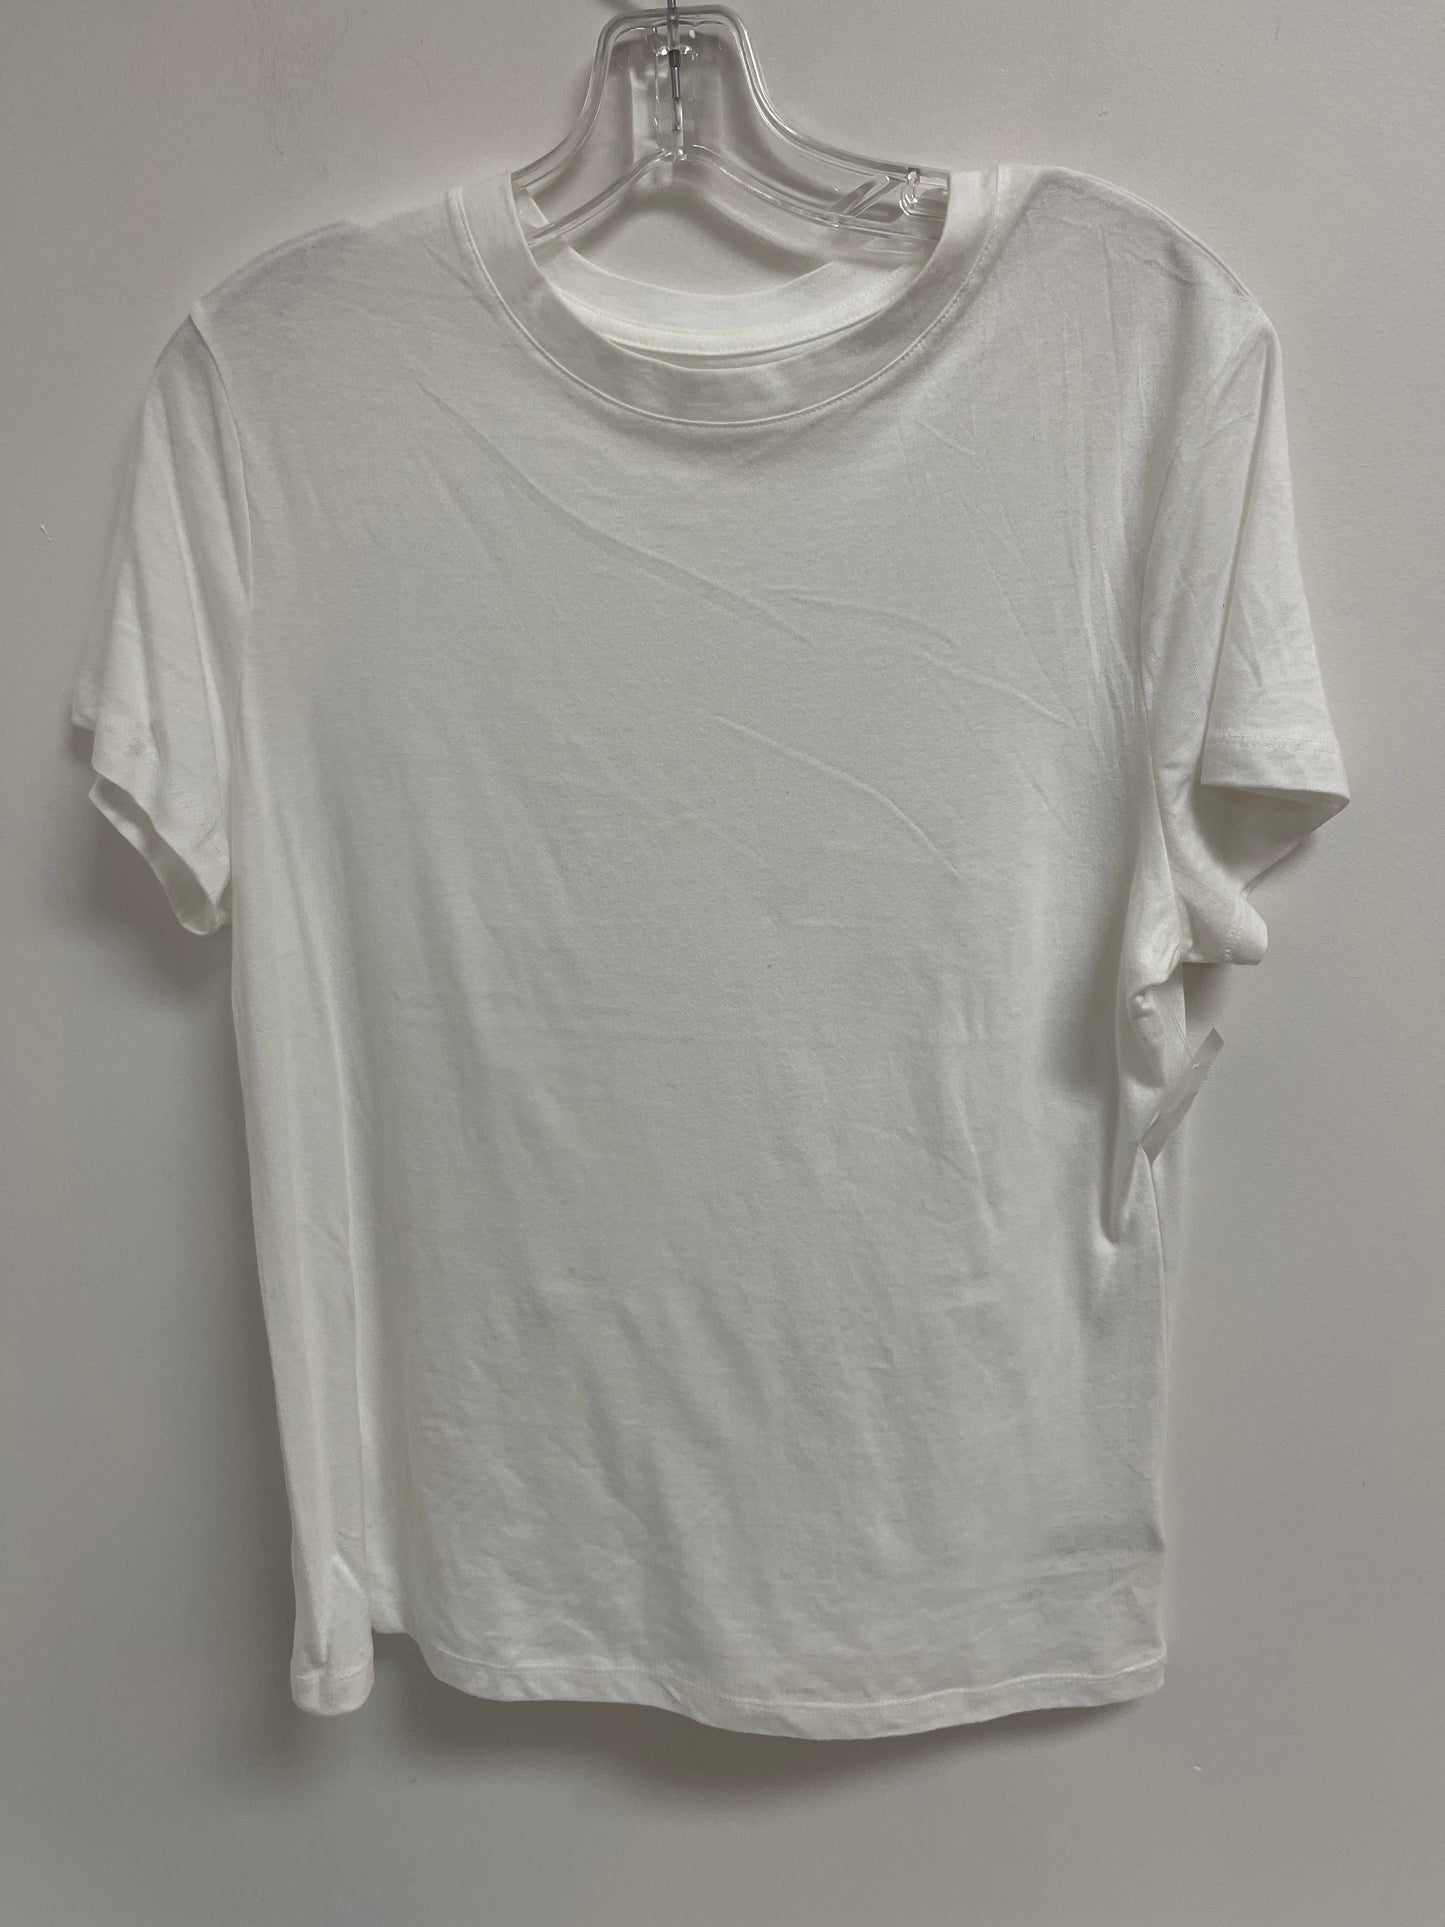 White Top Short Sleeve Basic A New Day, Size M